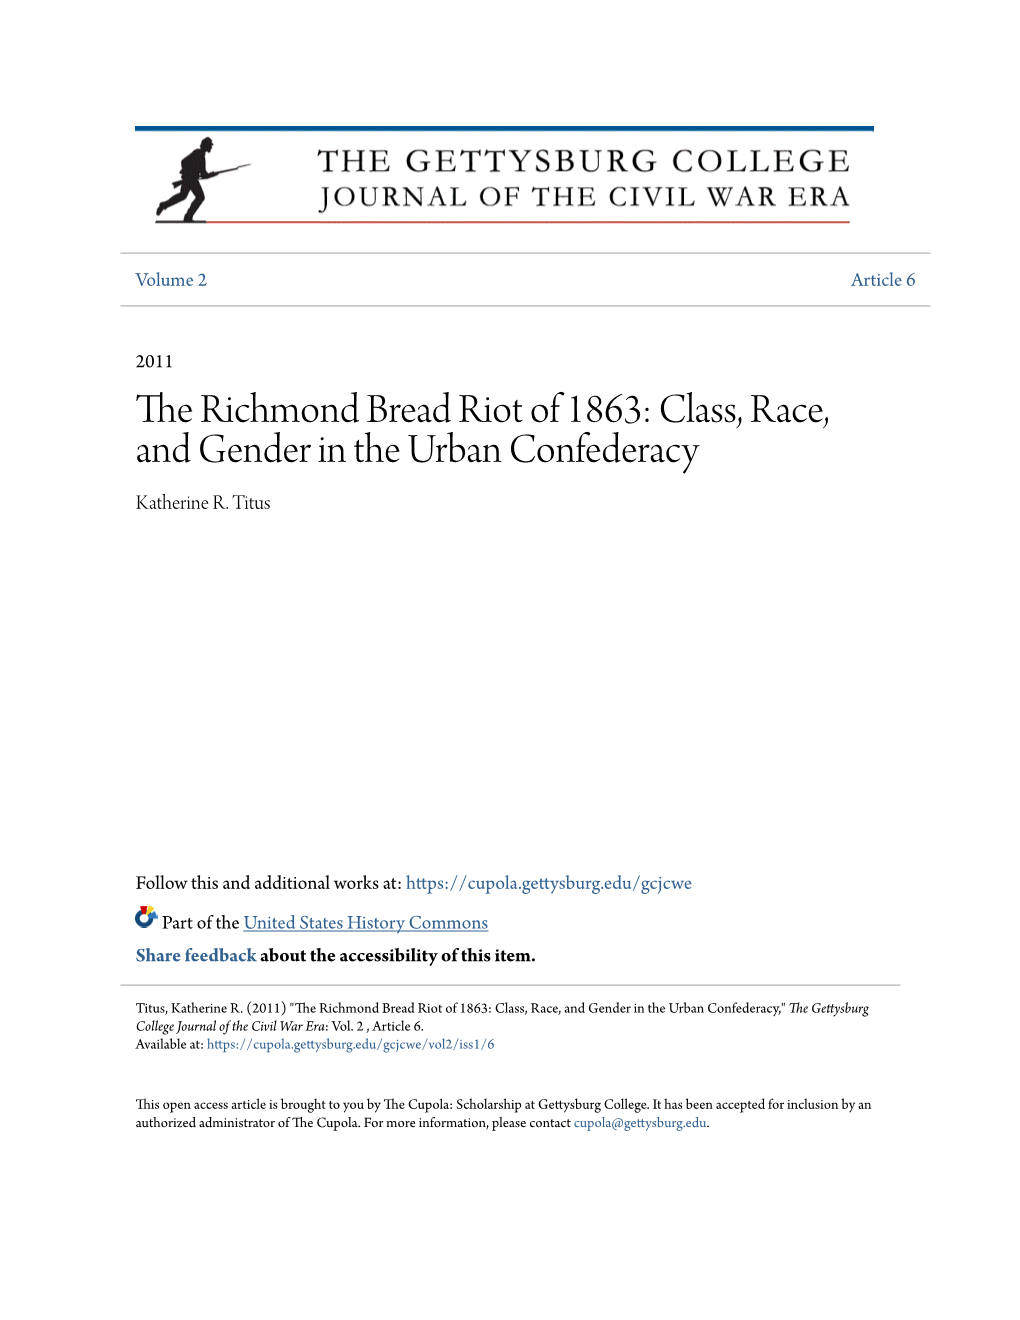 The Richmond Bread Riot of 1863: Class, Race, and Gender in the Urban Confederacy Katherine R